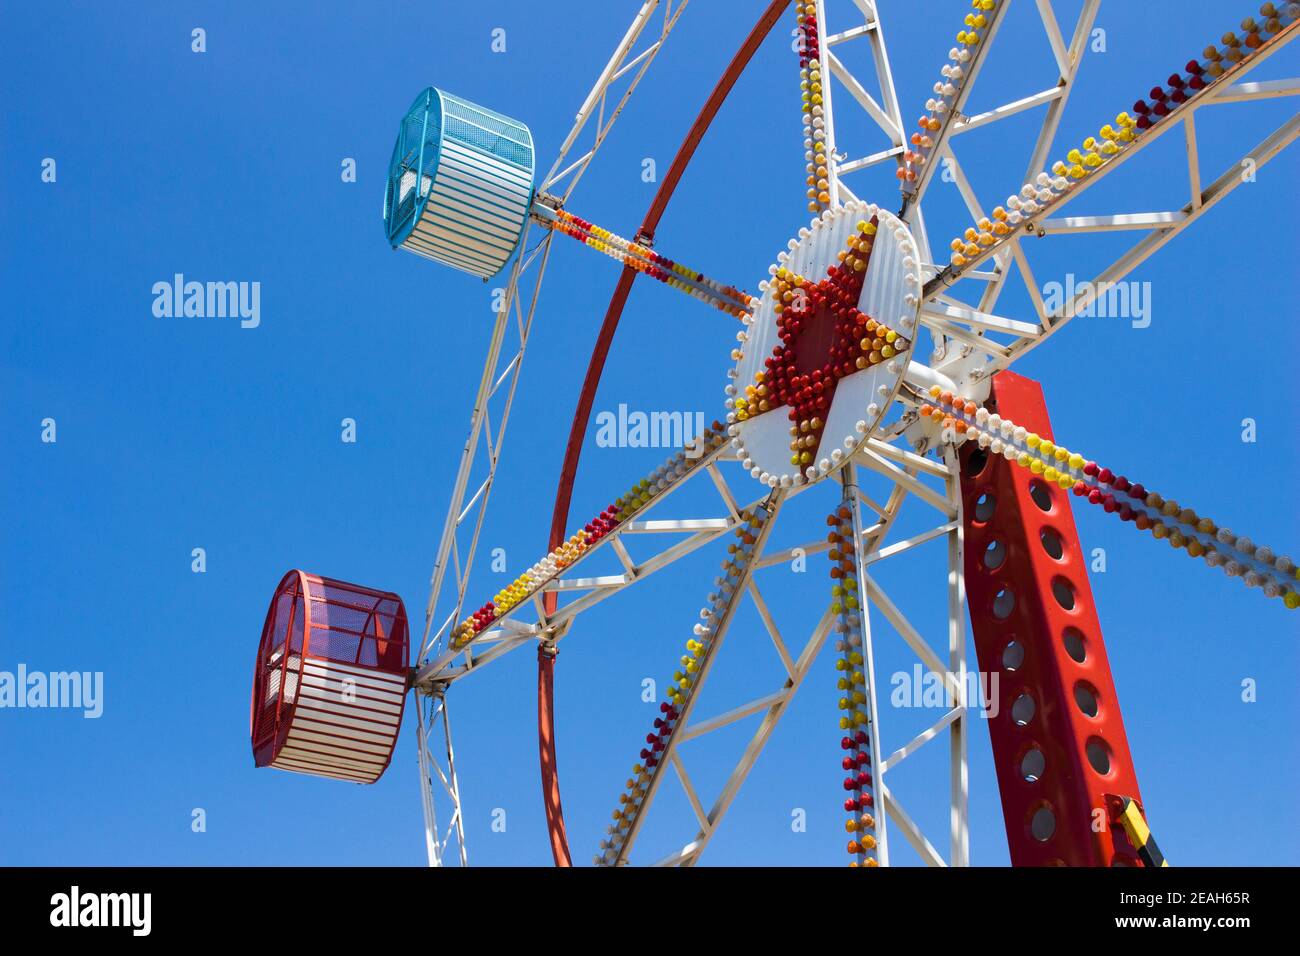 Big Wheel detail with two seats at amusement park. Blue sky on summer day. Stock Photo